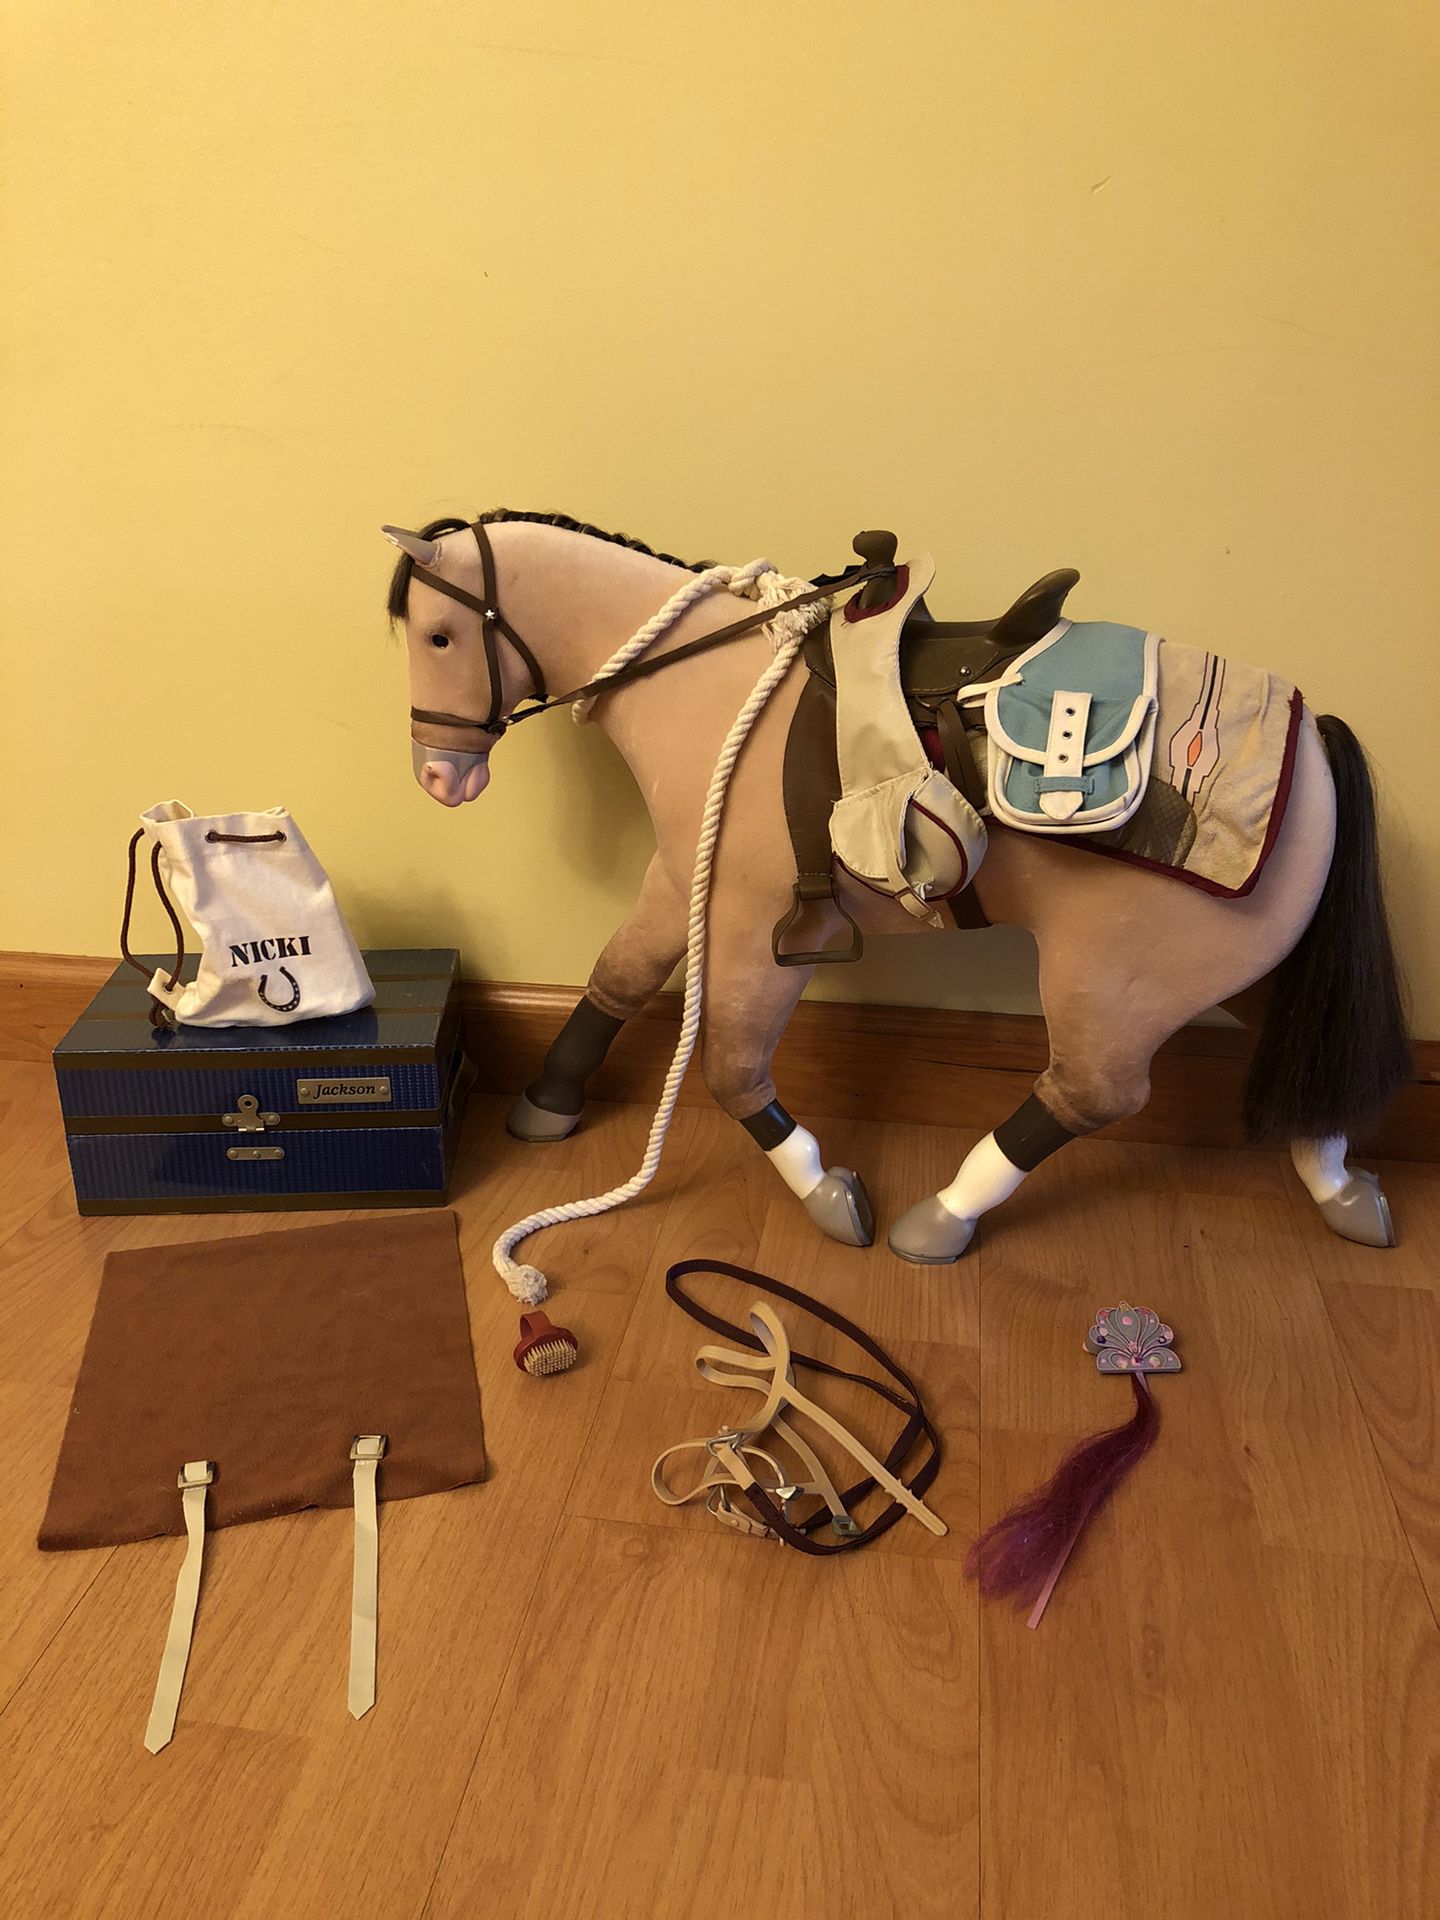 16.5” HORSE “Jackson” American Girl Doll and Accessories Set